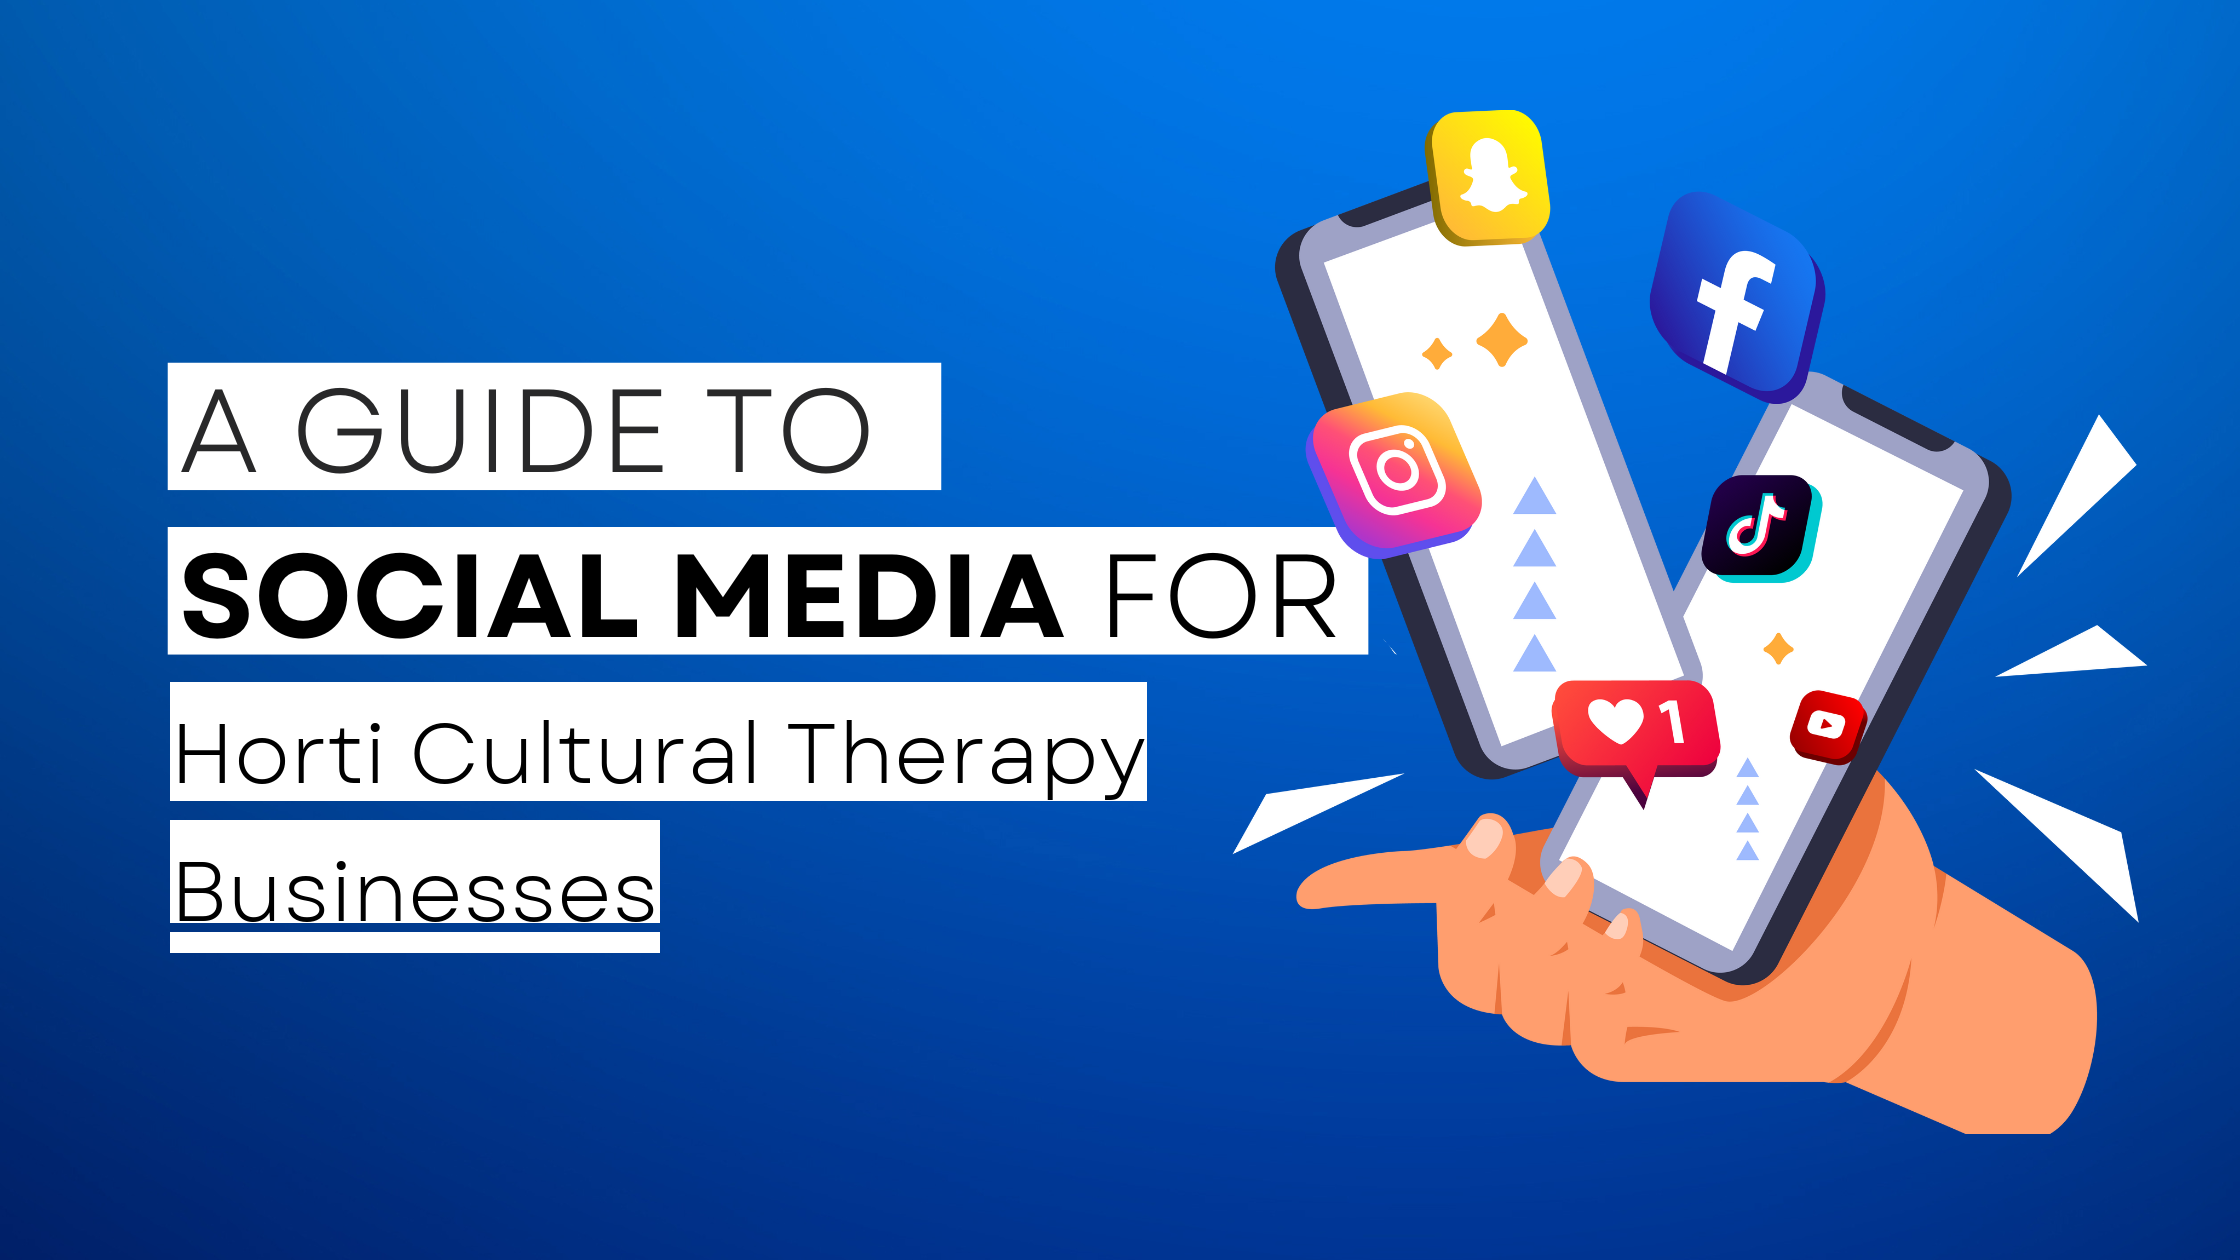 How to start Horti Cultural Therapy  on social media